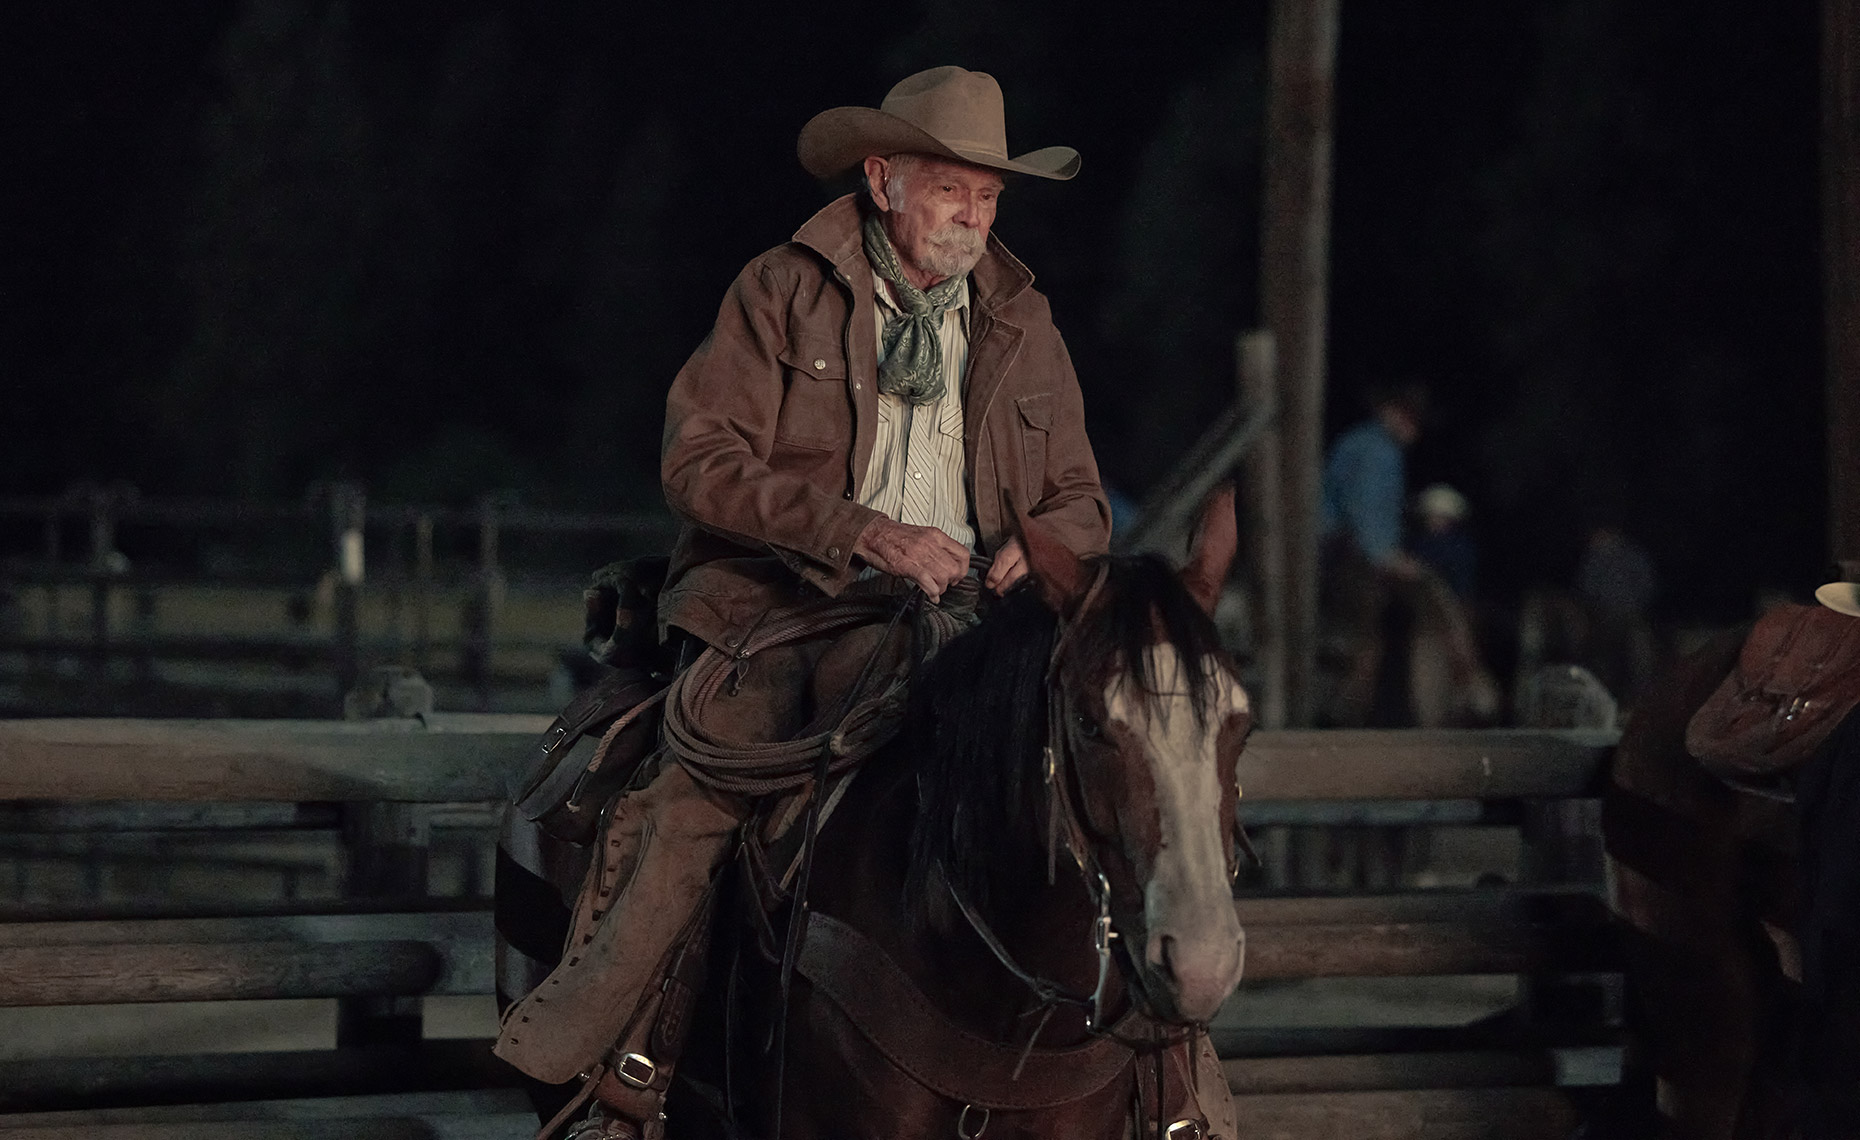 Emmett Walsh played by Buck Taylor